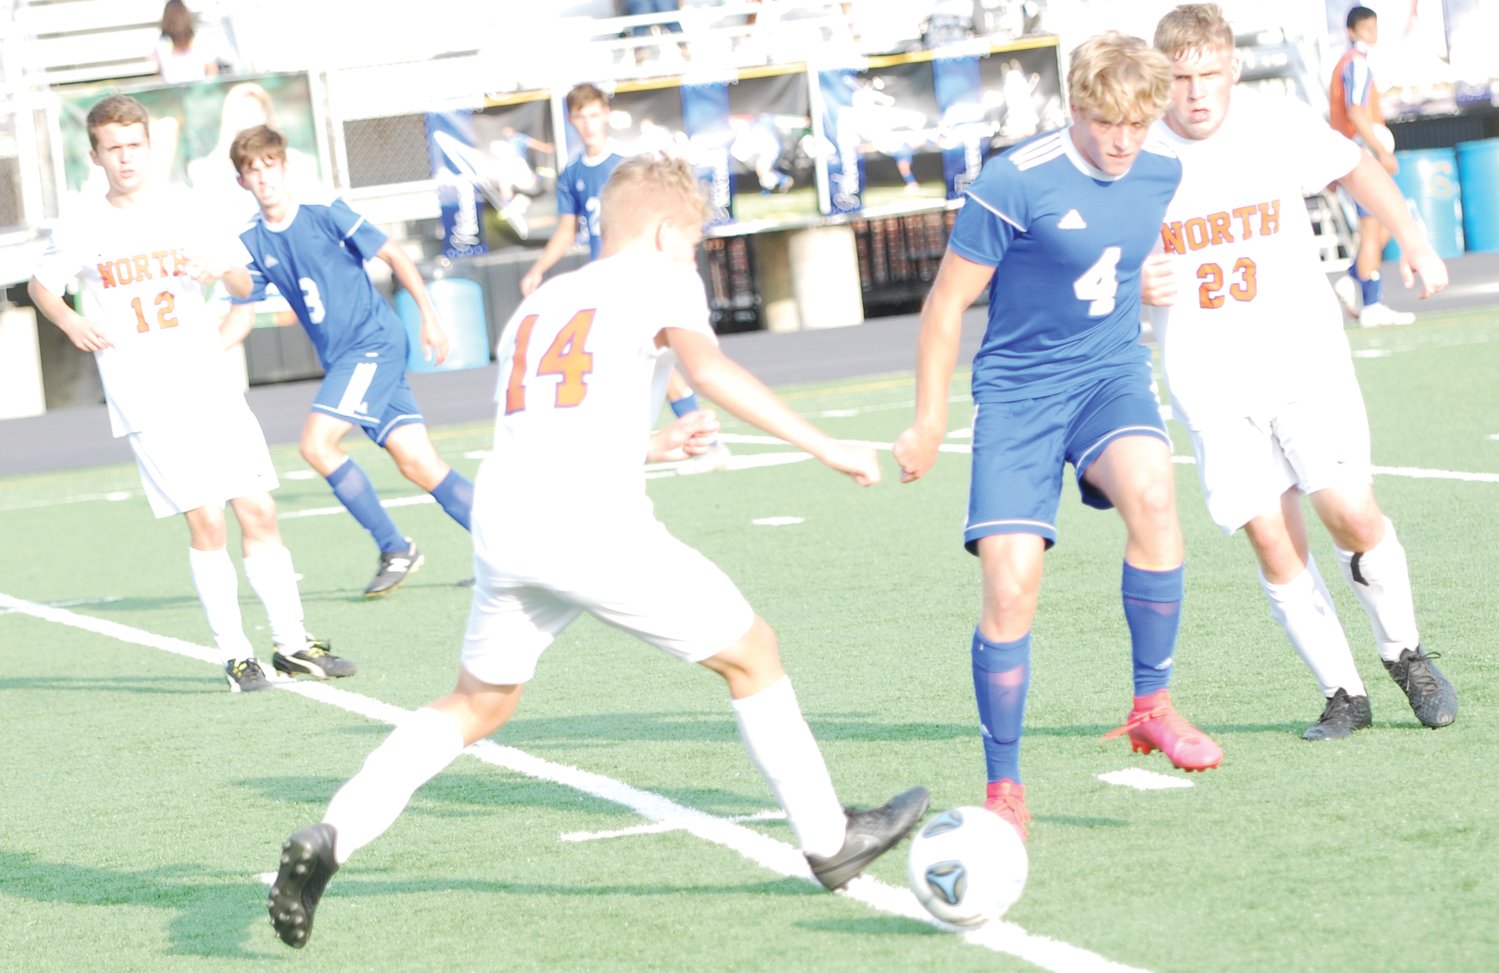 Crawfordsville's Eli Reeves fights for possession with North Montgomery's Caleb Hunsberger.